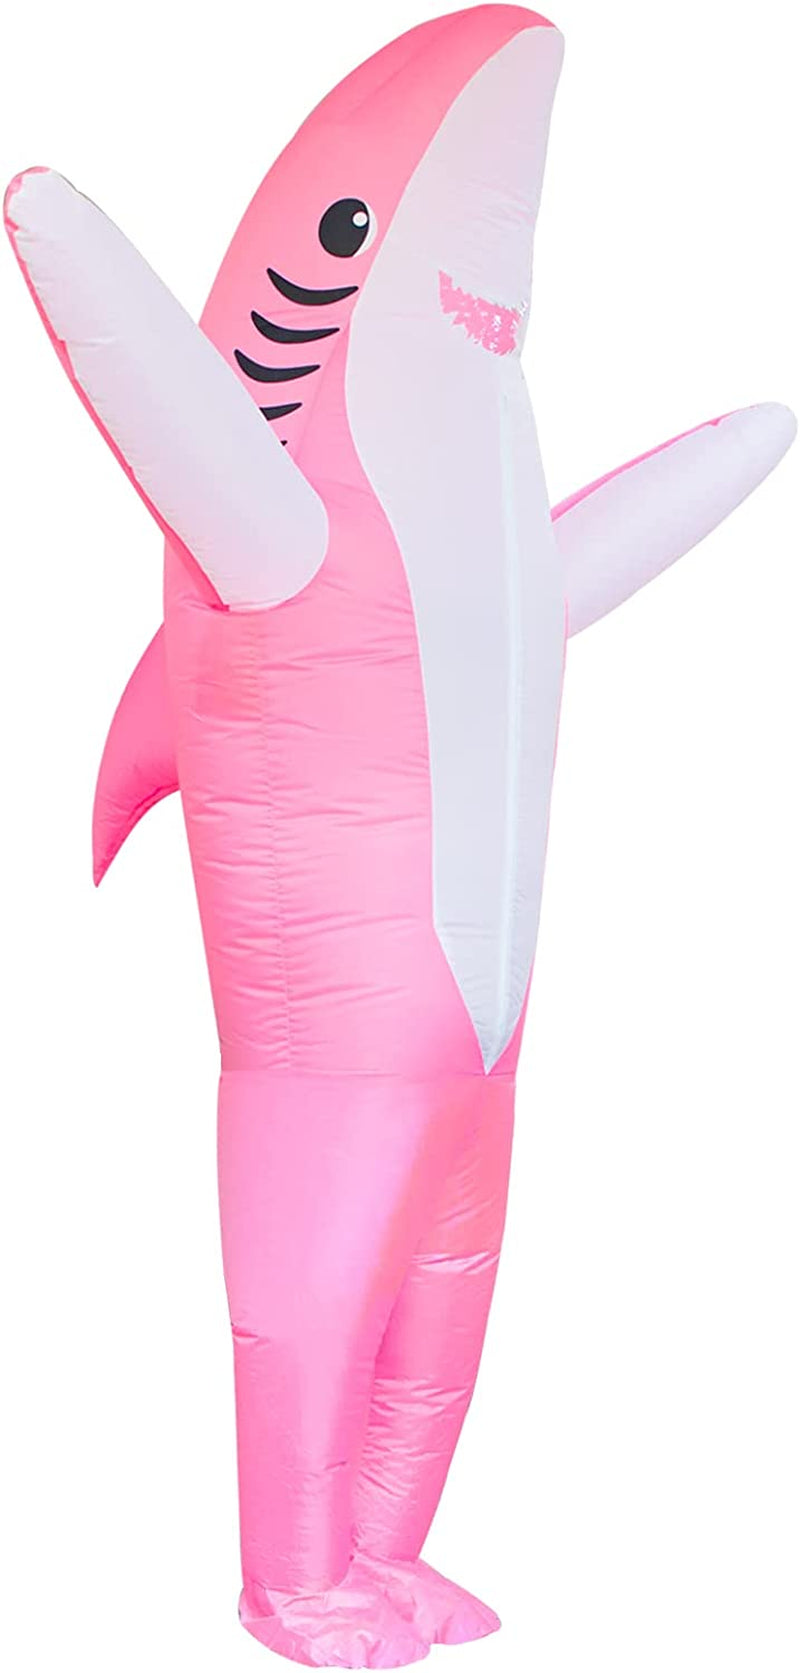 Adults Inflatable Halloween Costumes Blow up Shark Costume for Halloween, Birthday Gift Cos Play Party  Poptrend Pink Shark Costume  